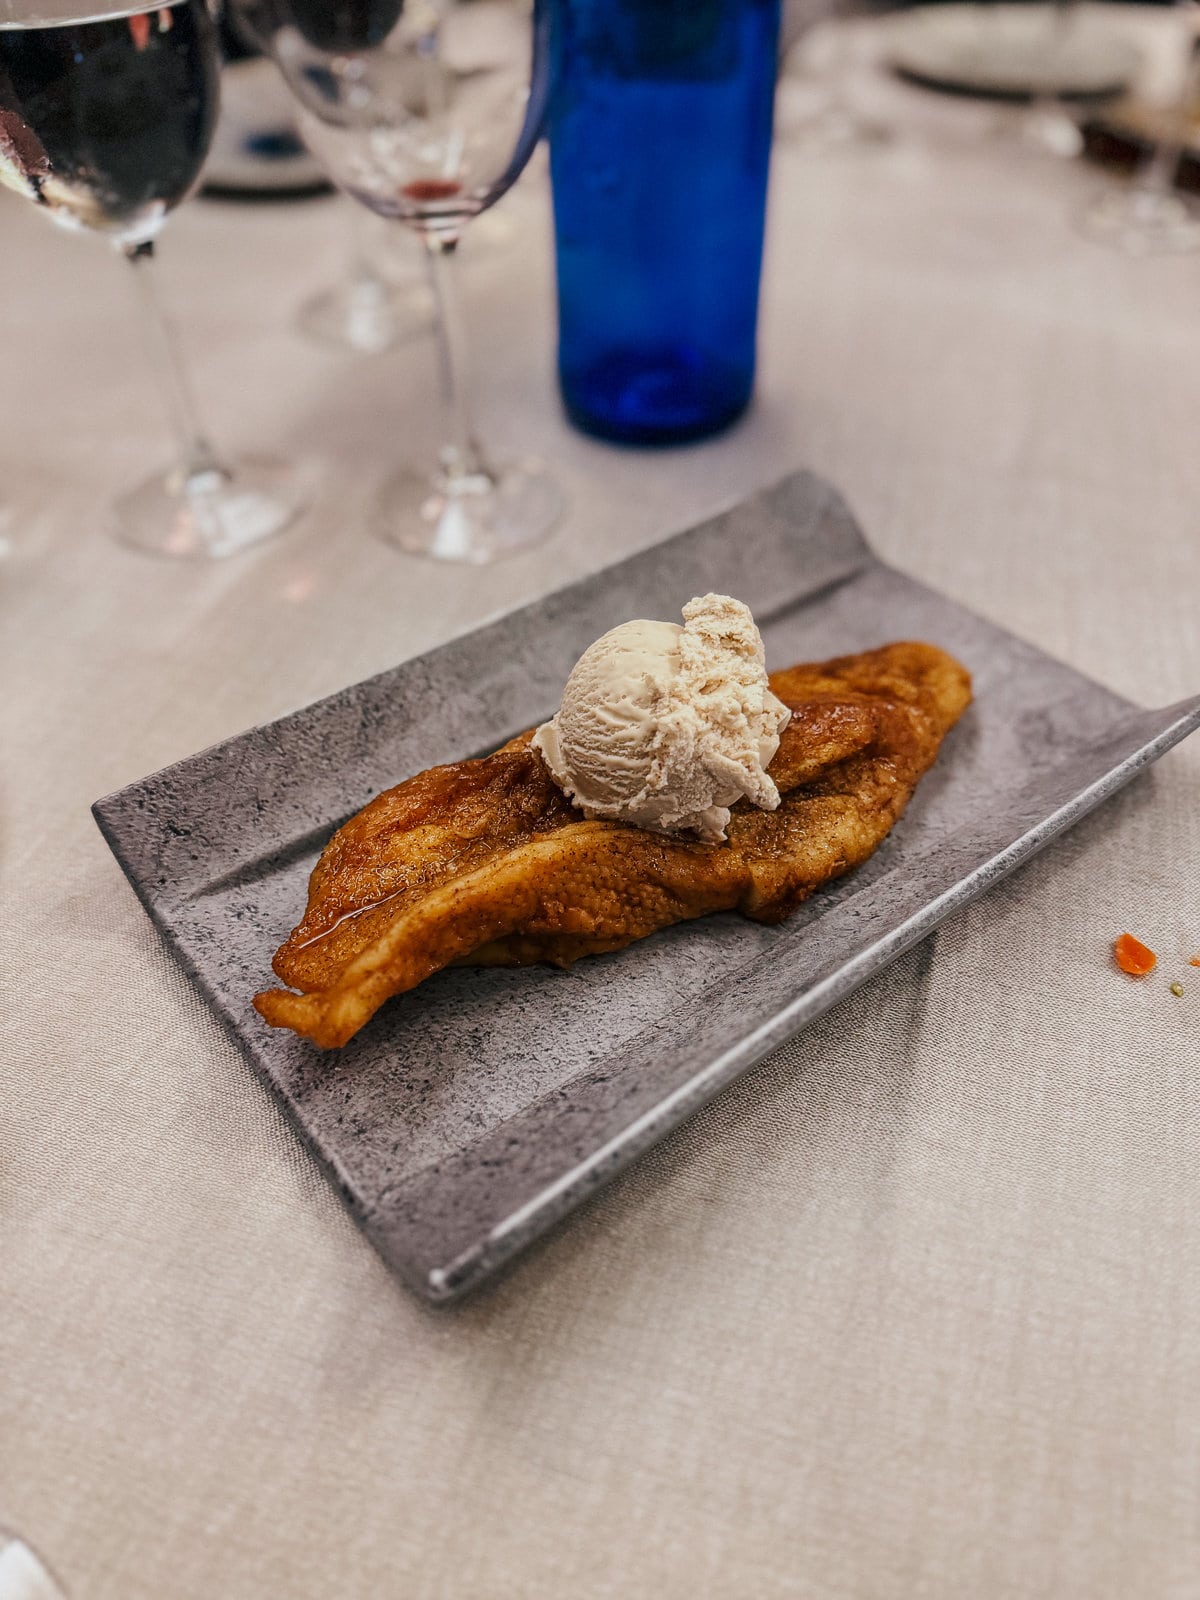 golden brown Spanish french toast with a scoop of ice cream on a white table with a blue glass of water